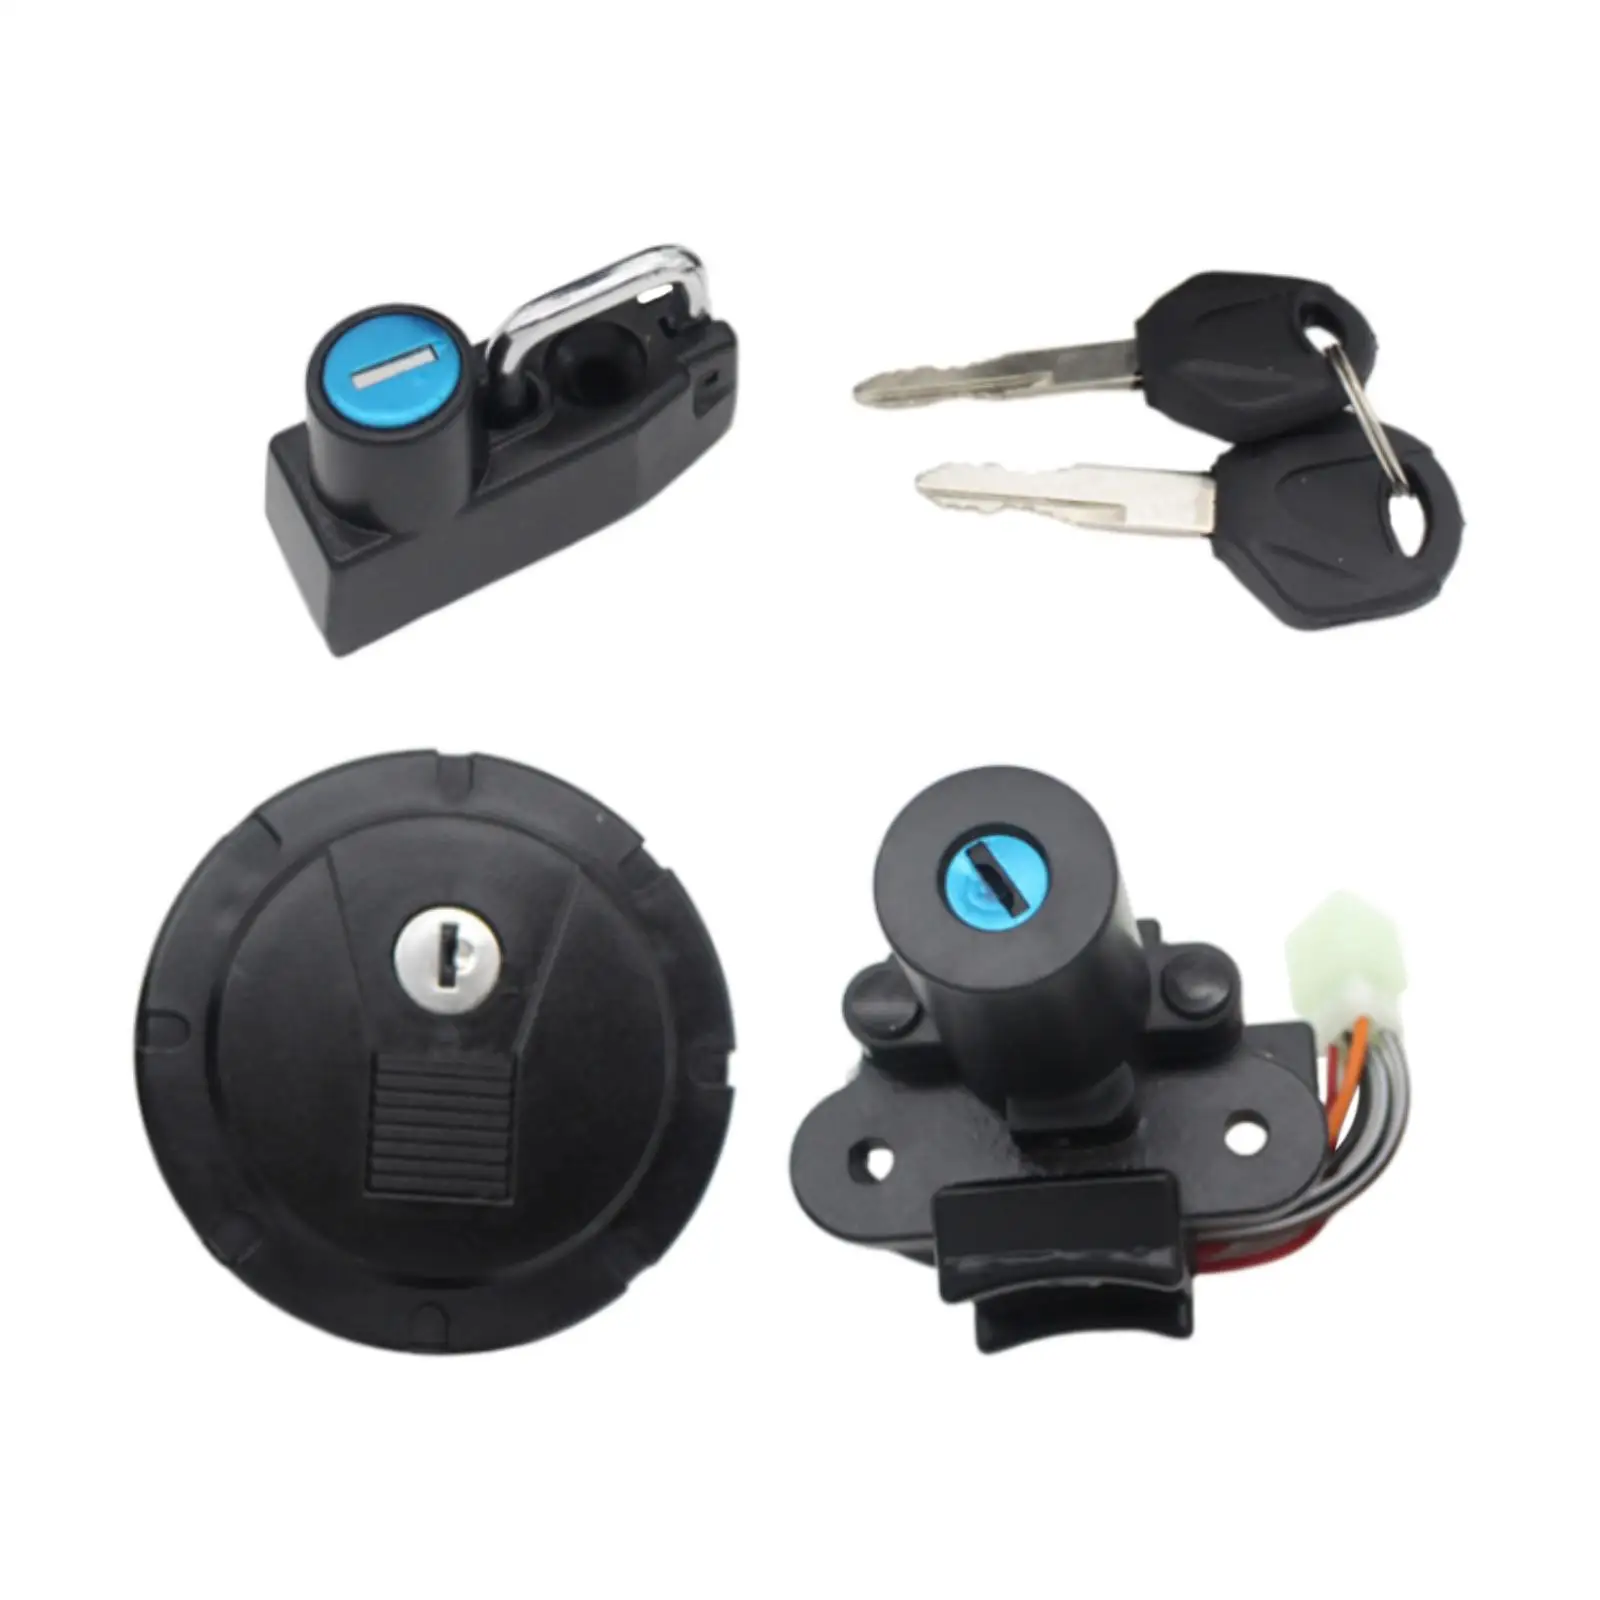 Fuel Gas Tank Cap Lock Cover with Keys Sturdy Accessories for Kawasaki Klx250 Klx250SF Easily Install Motorbike Spare Parts